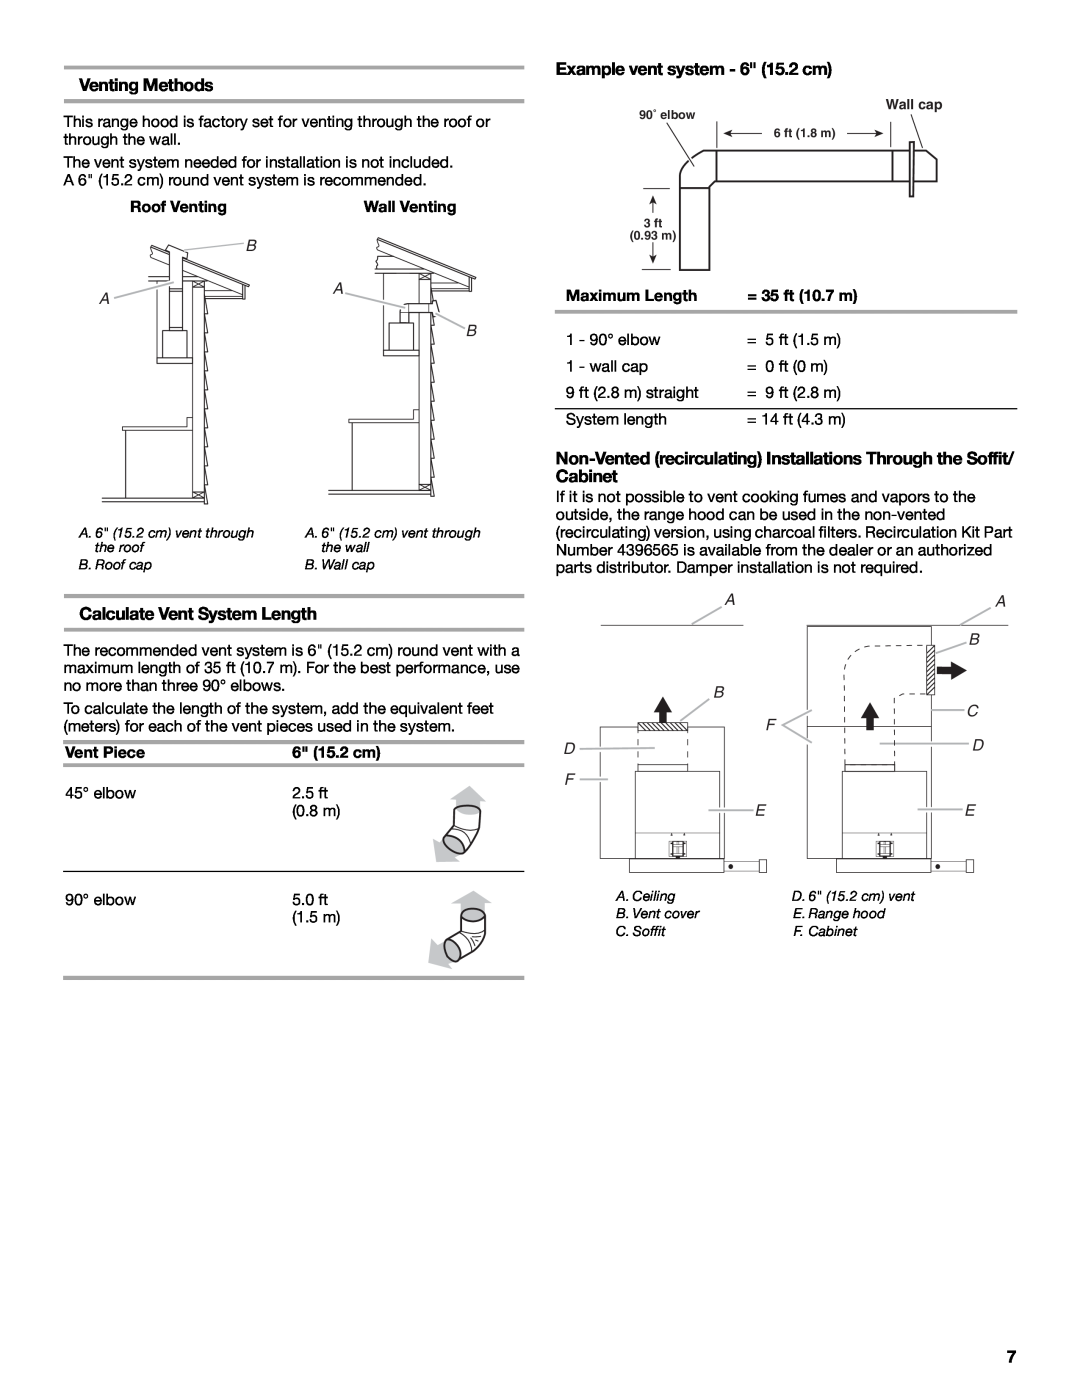 KitchenAid W10267109C Venting Methods, Example vent system - 6 15.2 cm, Calculate Vent System Length, Roof Venting, elbow 